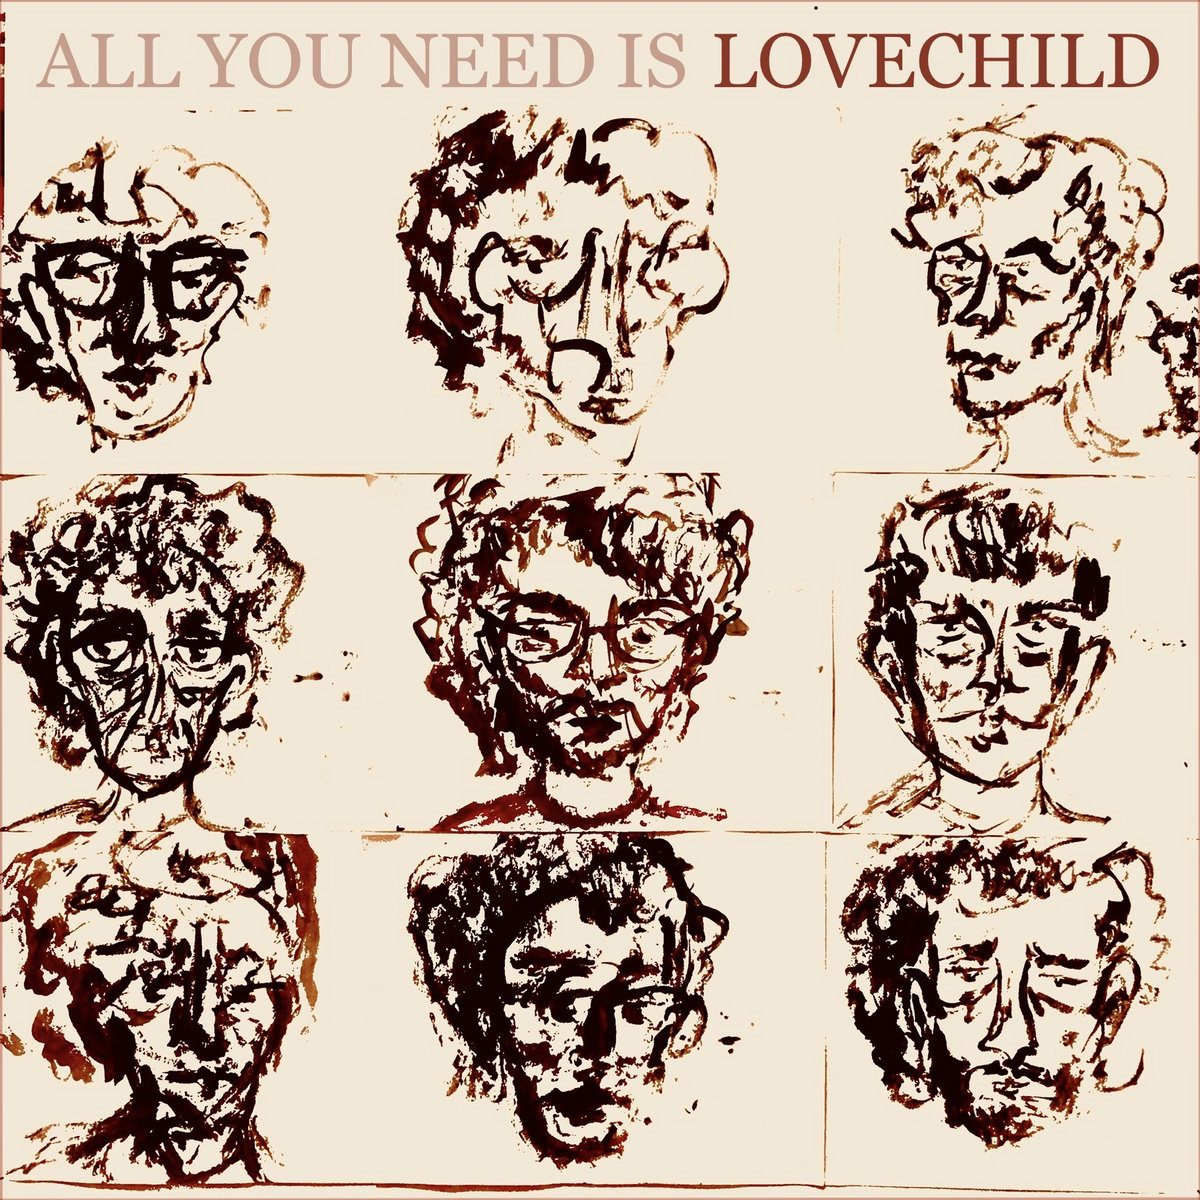 Album Review: Lovechild - All You Need is Lovechild